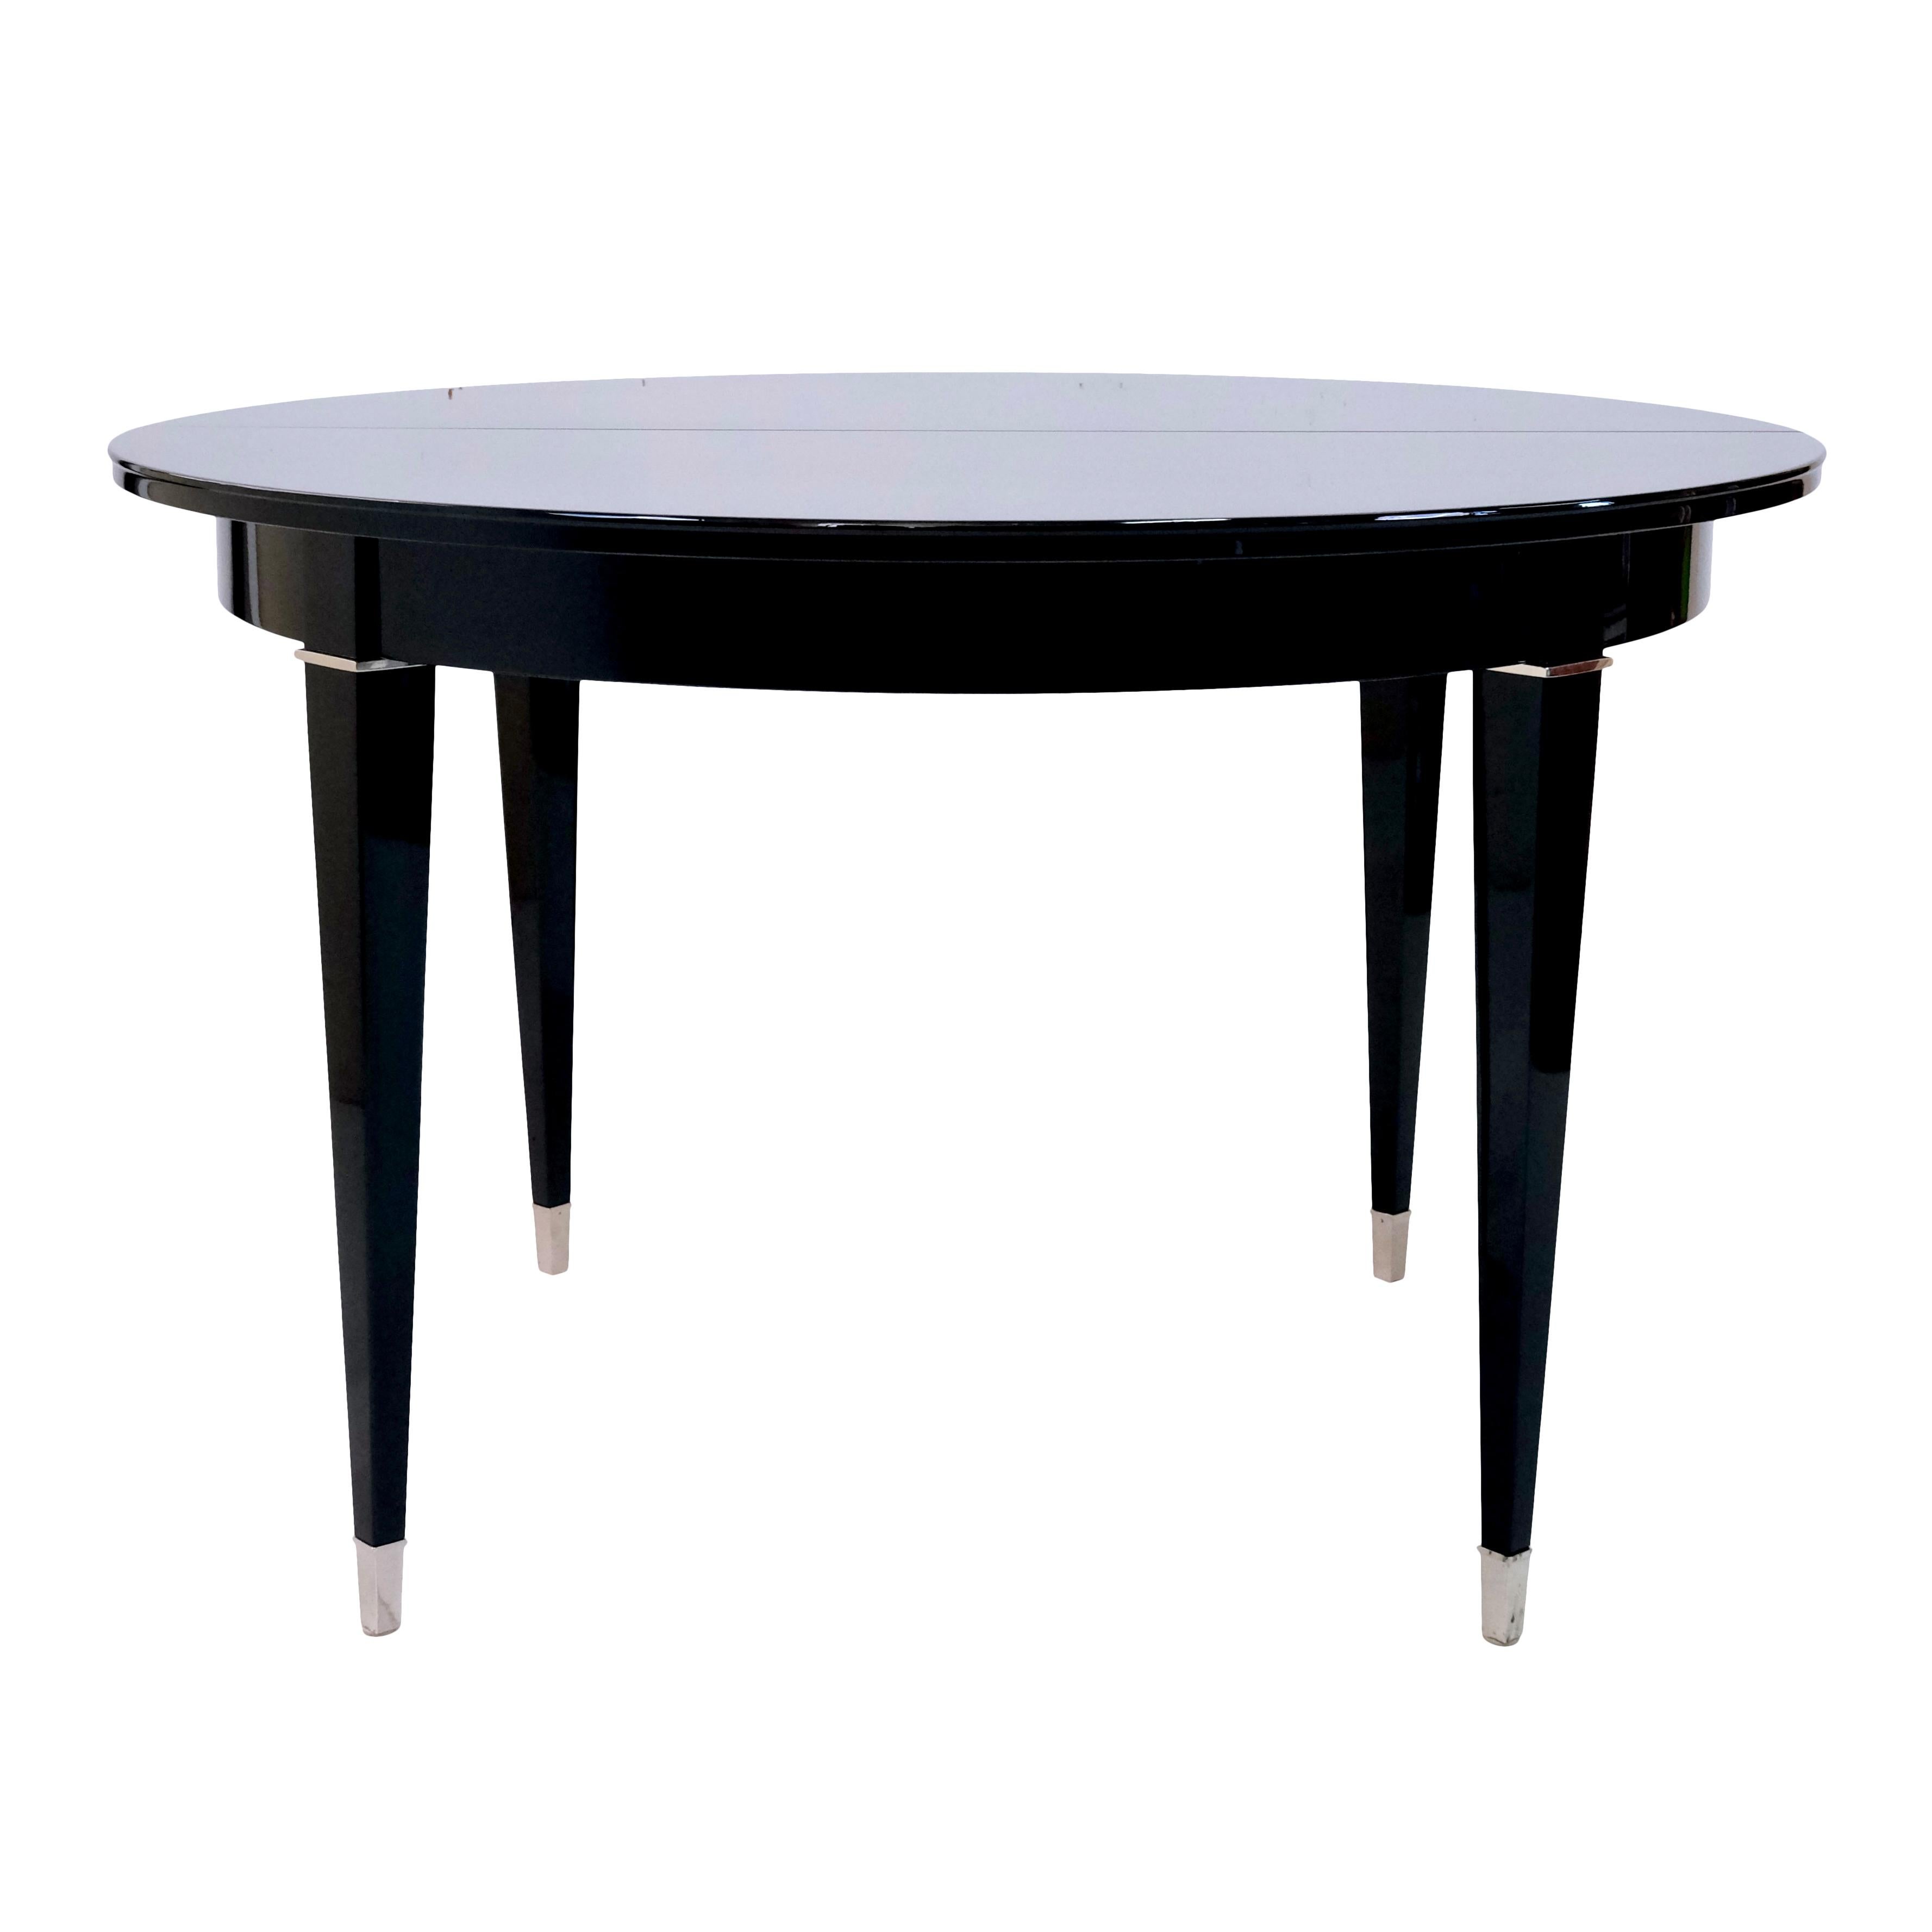 Blackened French 1930s Round Art Deco Dining or Center Table in Black Lacquer